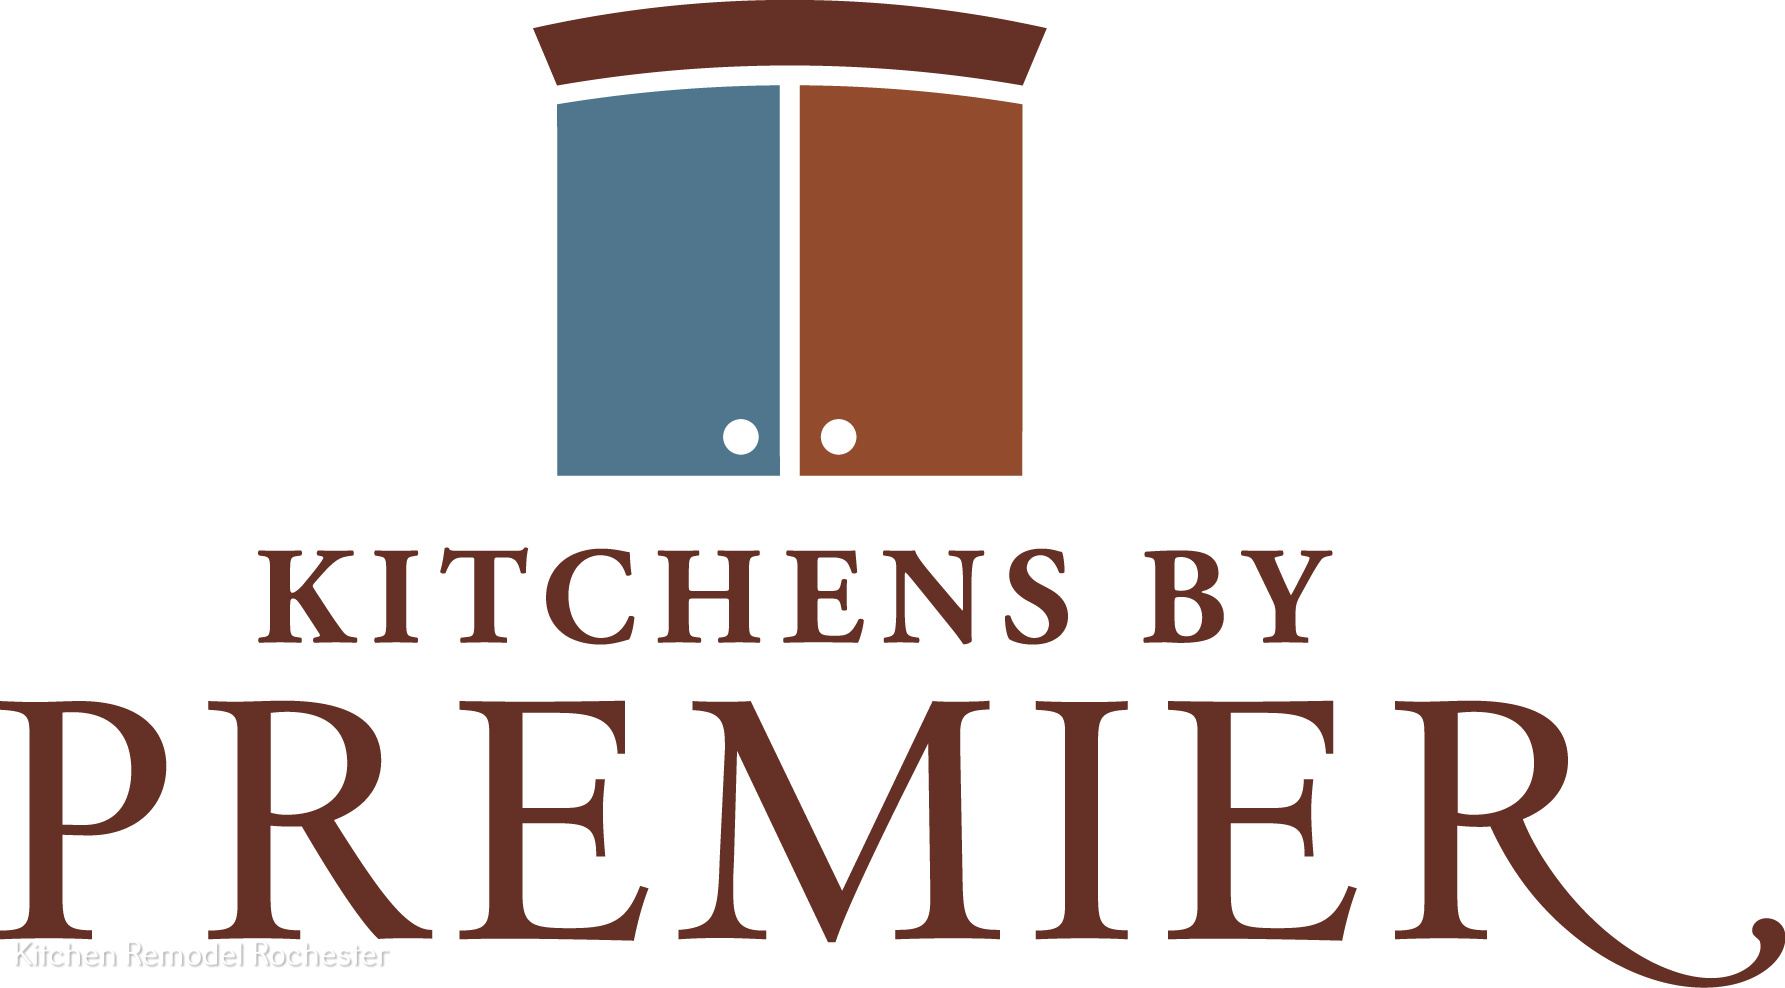 Kitchens by Premier Outlines Reasons Why People Should Consider Kitchen Remodeling